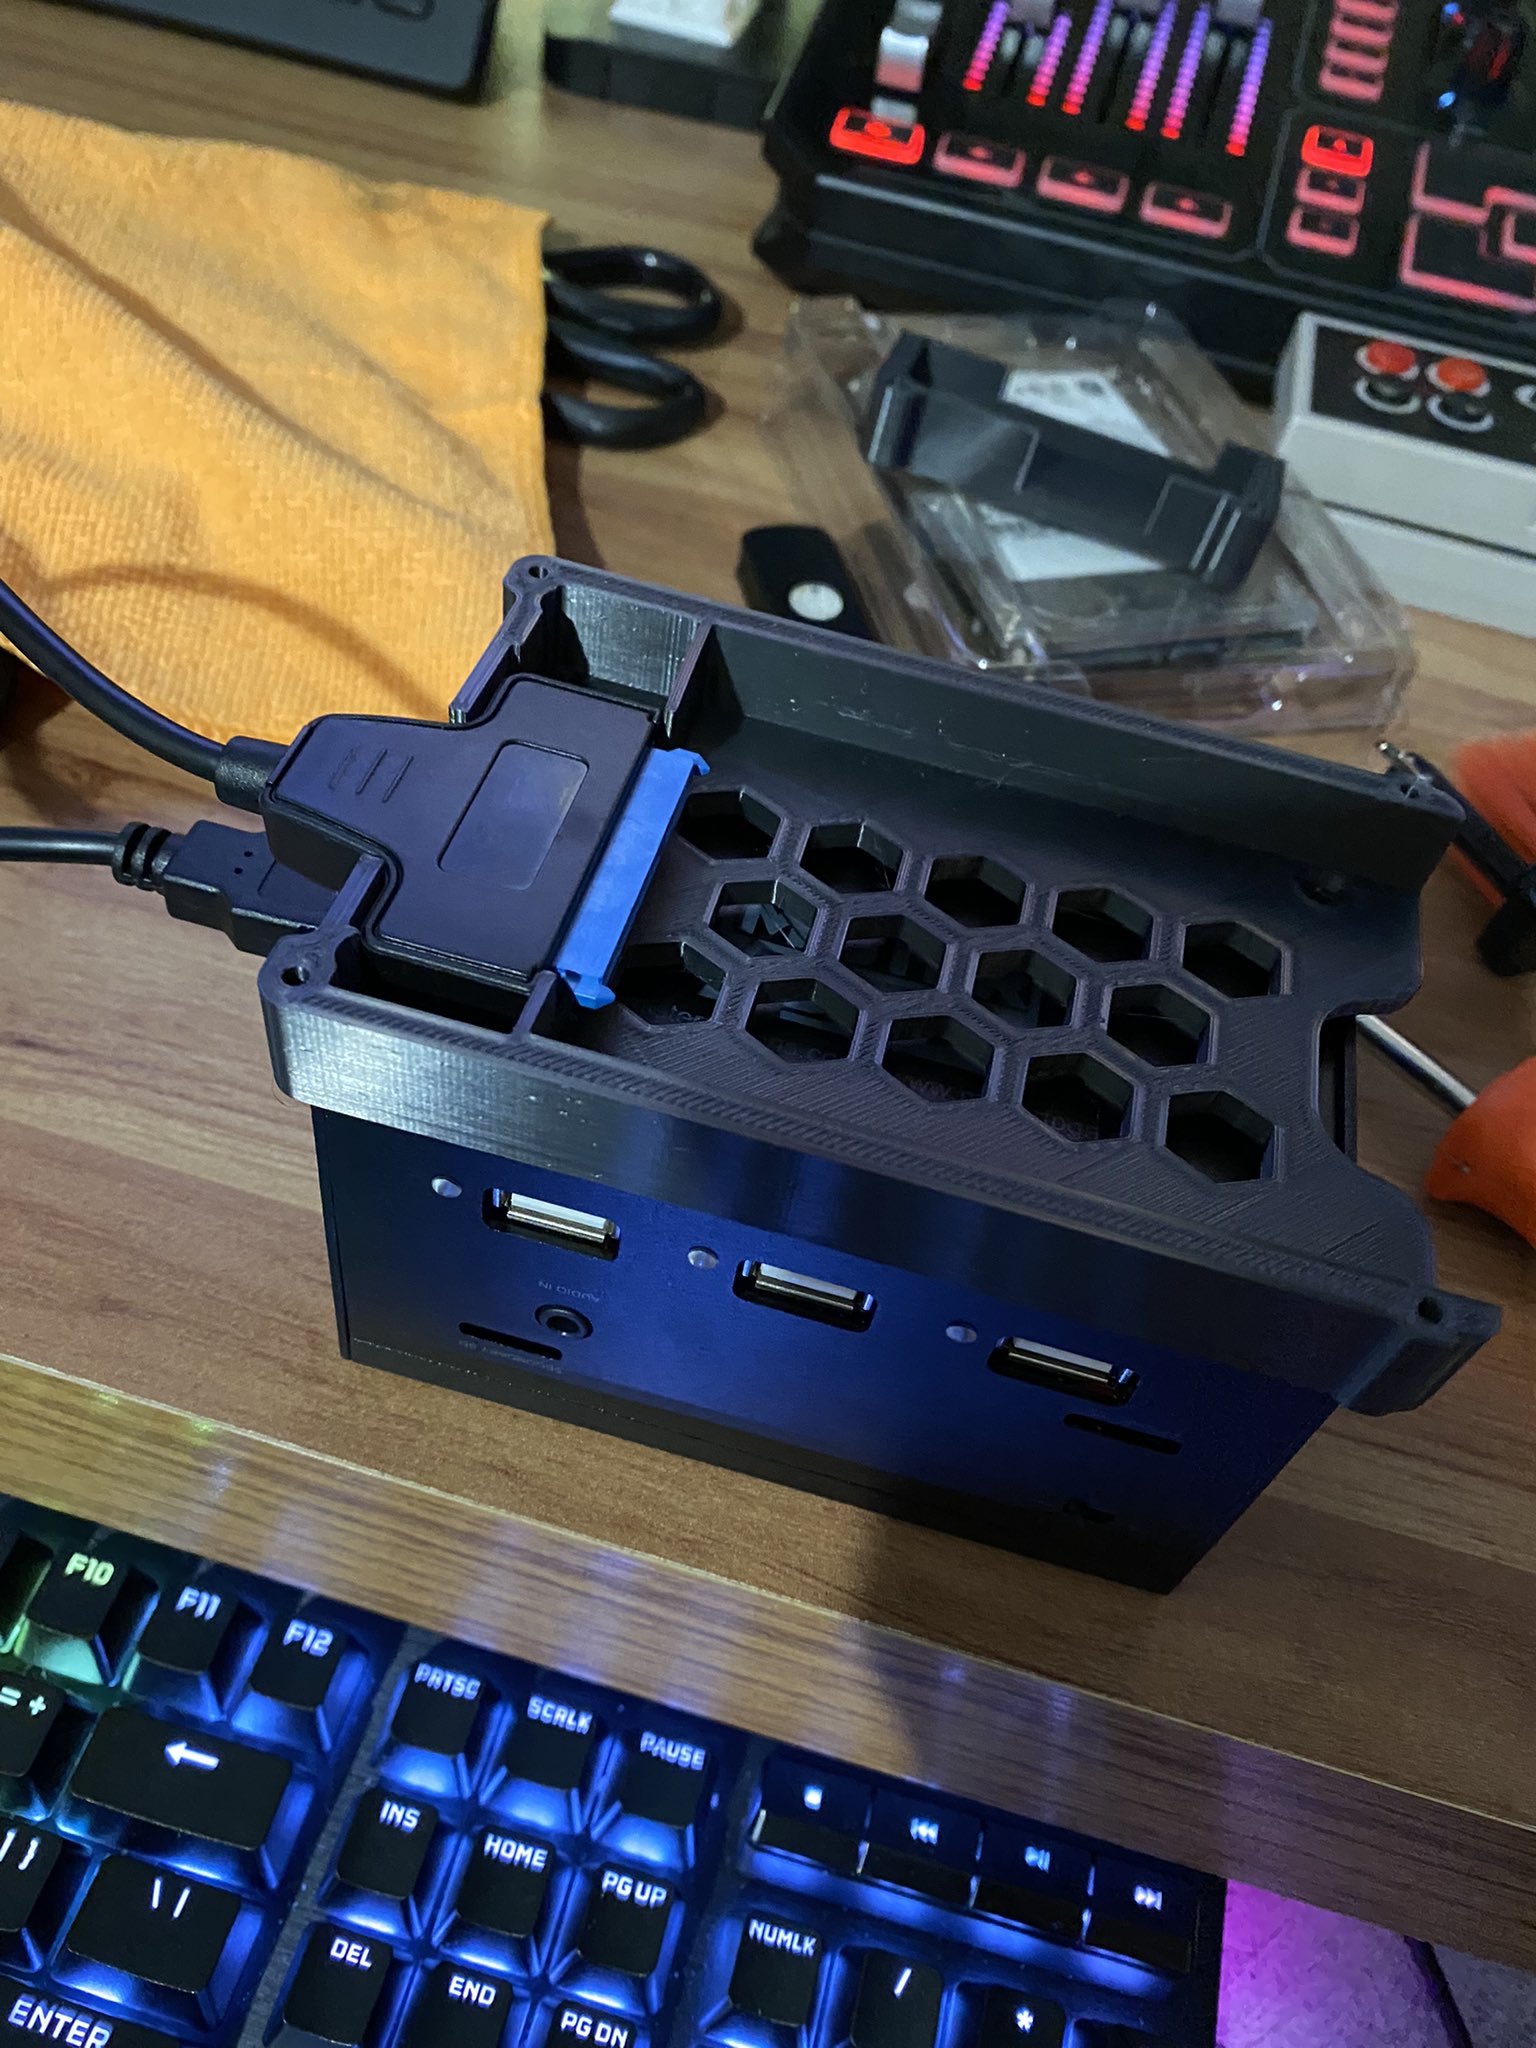 MASE Front Open - MiSTer Attached SATA Enclosure for MiSTer FPGA consoles